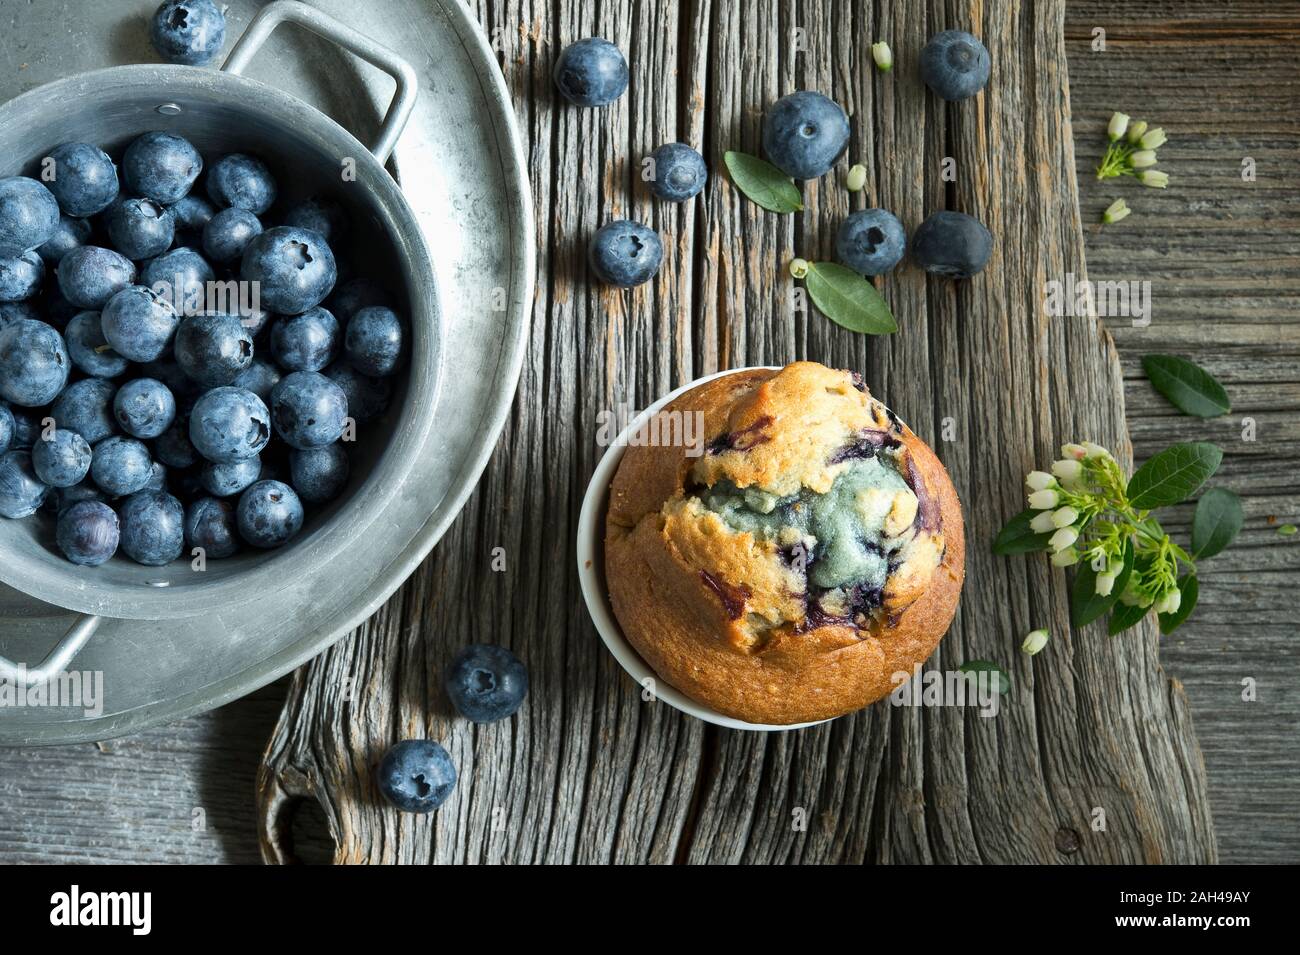 Baking pan with heap of fresh blueberries and single blueberry muffin Stock Photo